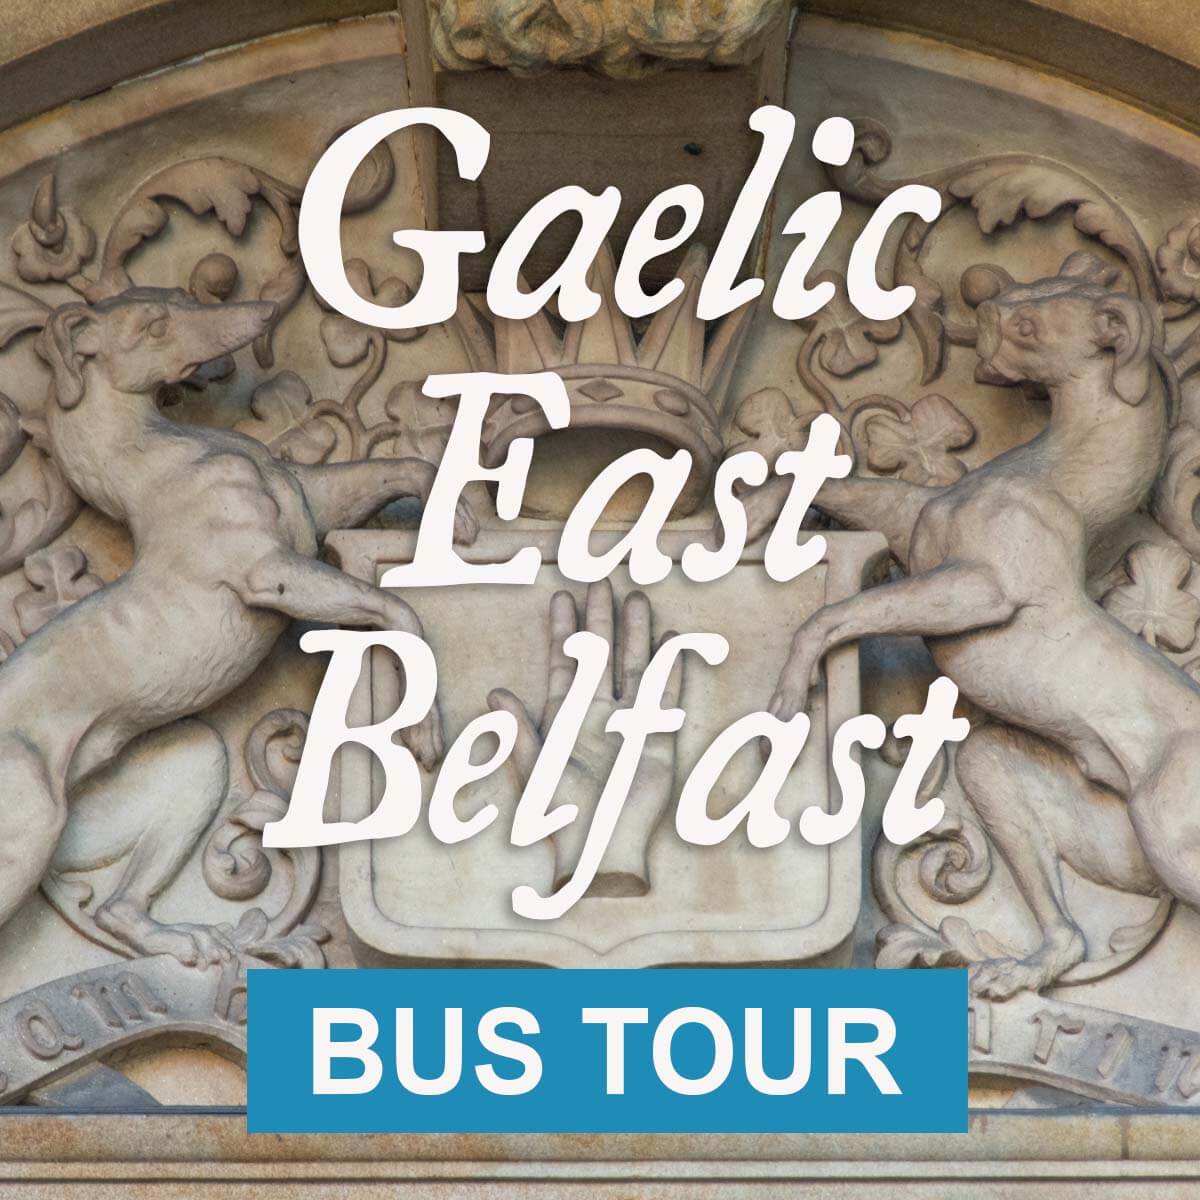 Gaelic East Belfast Tour illustration for Journey East Gaelic history guided bus tours in Belfast and East Belfast Northern Ireland - photo 6737